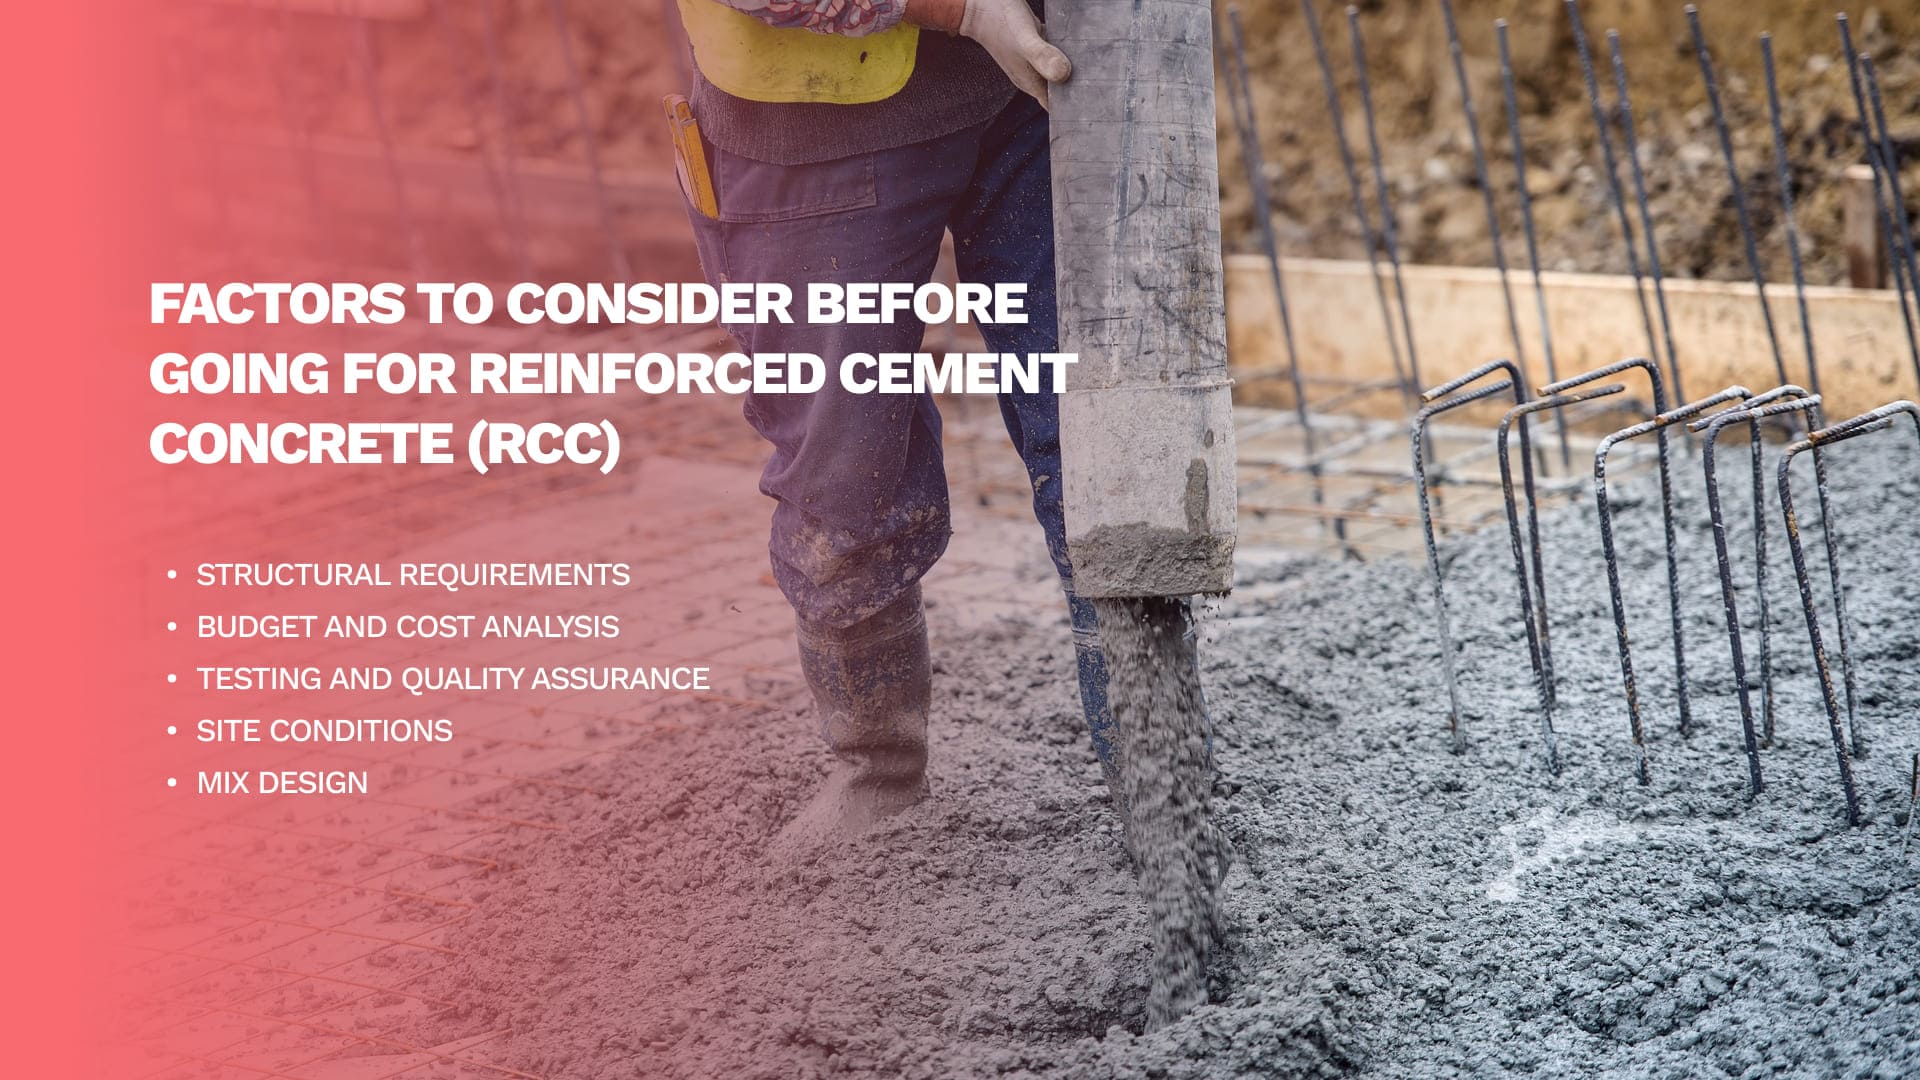 Factors To Consider Before Going for Reinforced Cement Concrete (RCC)